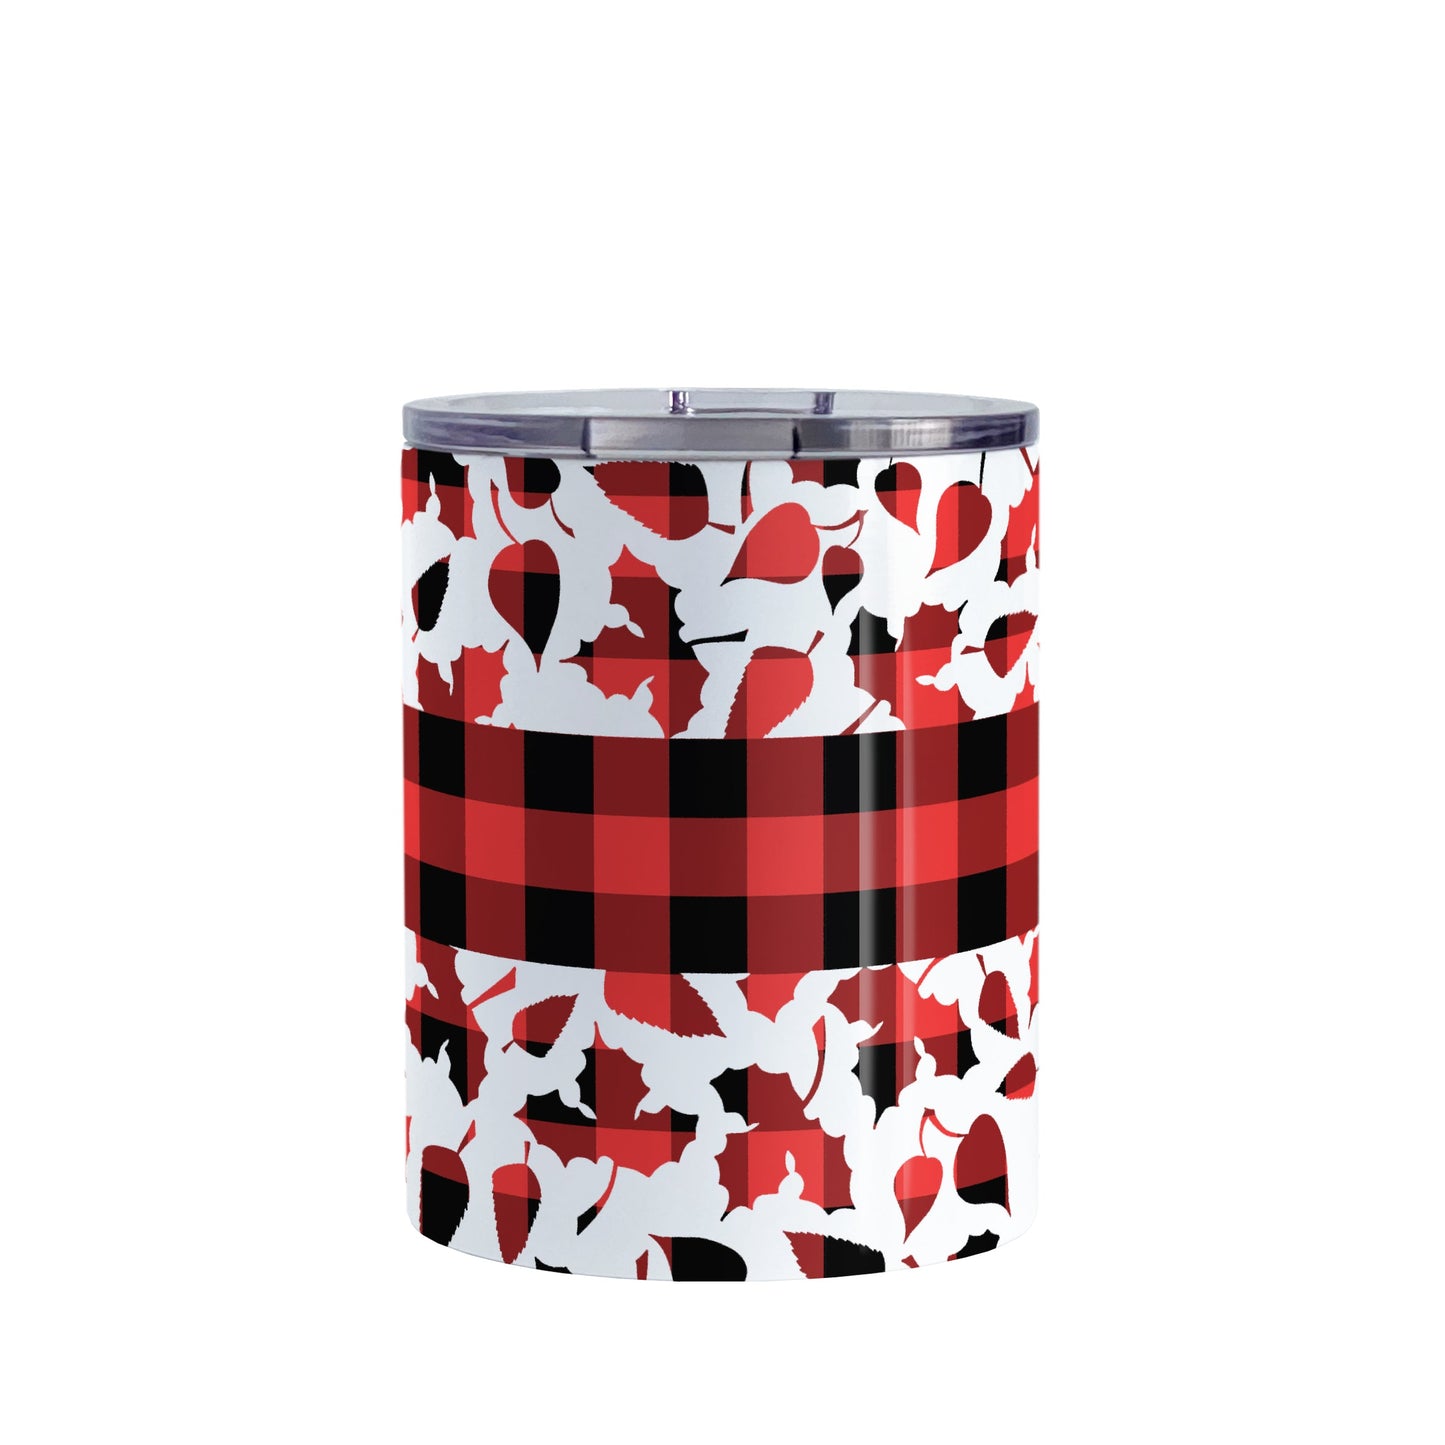 Buffalo Plaid Leaves Fall Tumbler Cup (10oz) at Amy's Coffee Mugs. A stainless steel insulated tumbler cup designed with a pattern of leaves with a red and black buffalo plaid pattern that wraps around the cup. There is a buffalo plaid stripe over the middle area of the leaves.